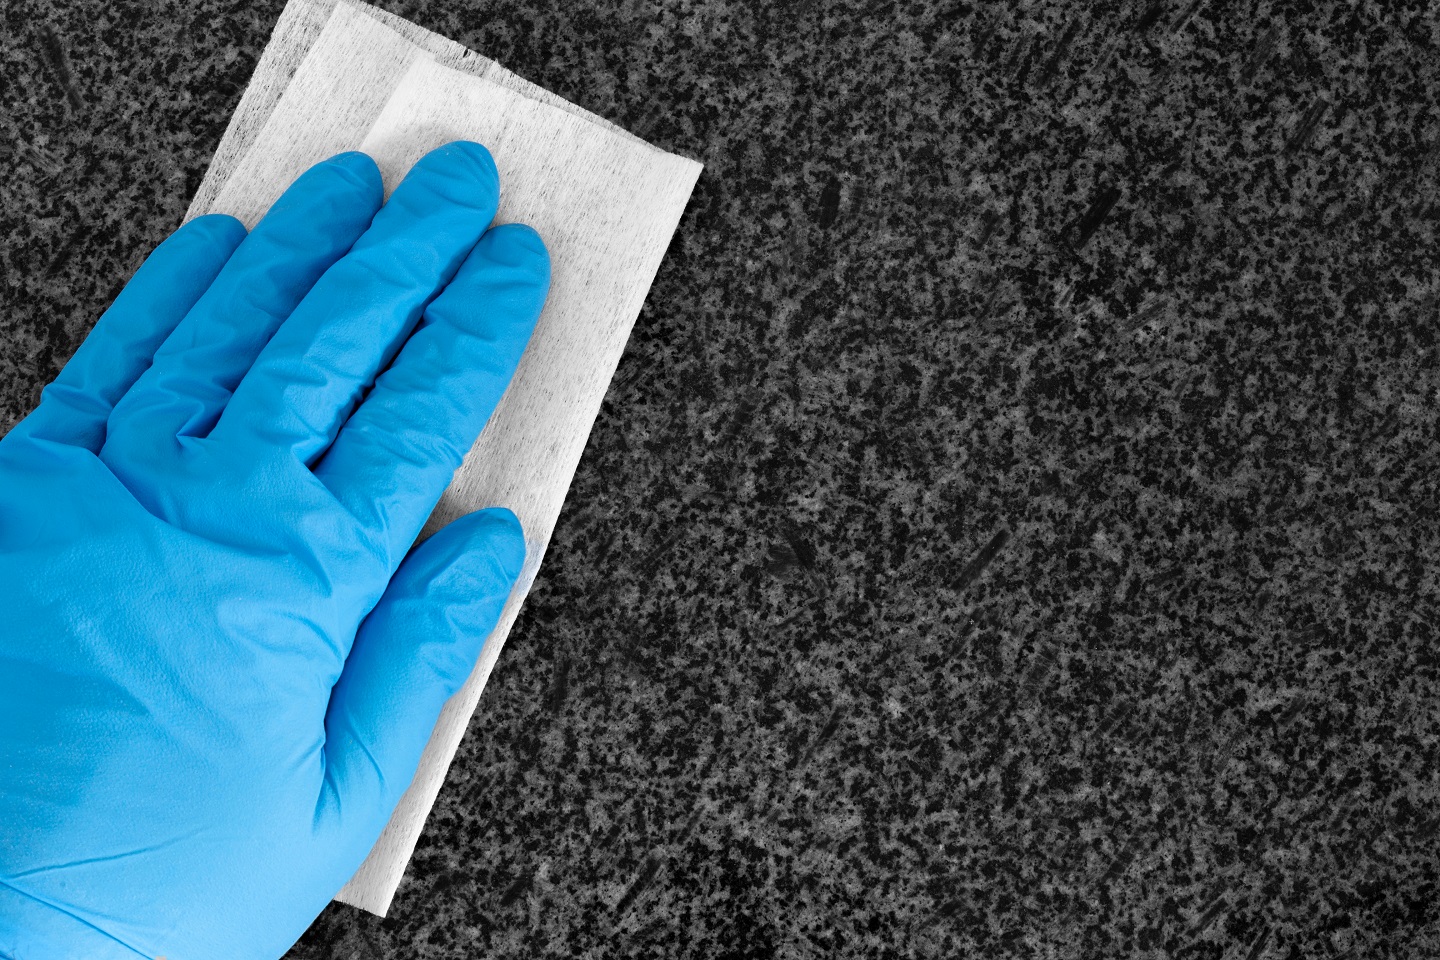 removing stains from surfaces